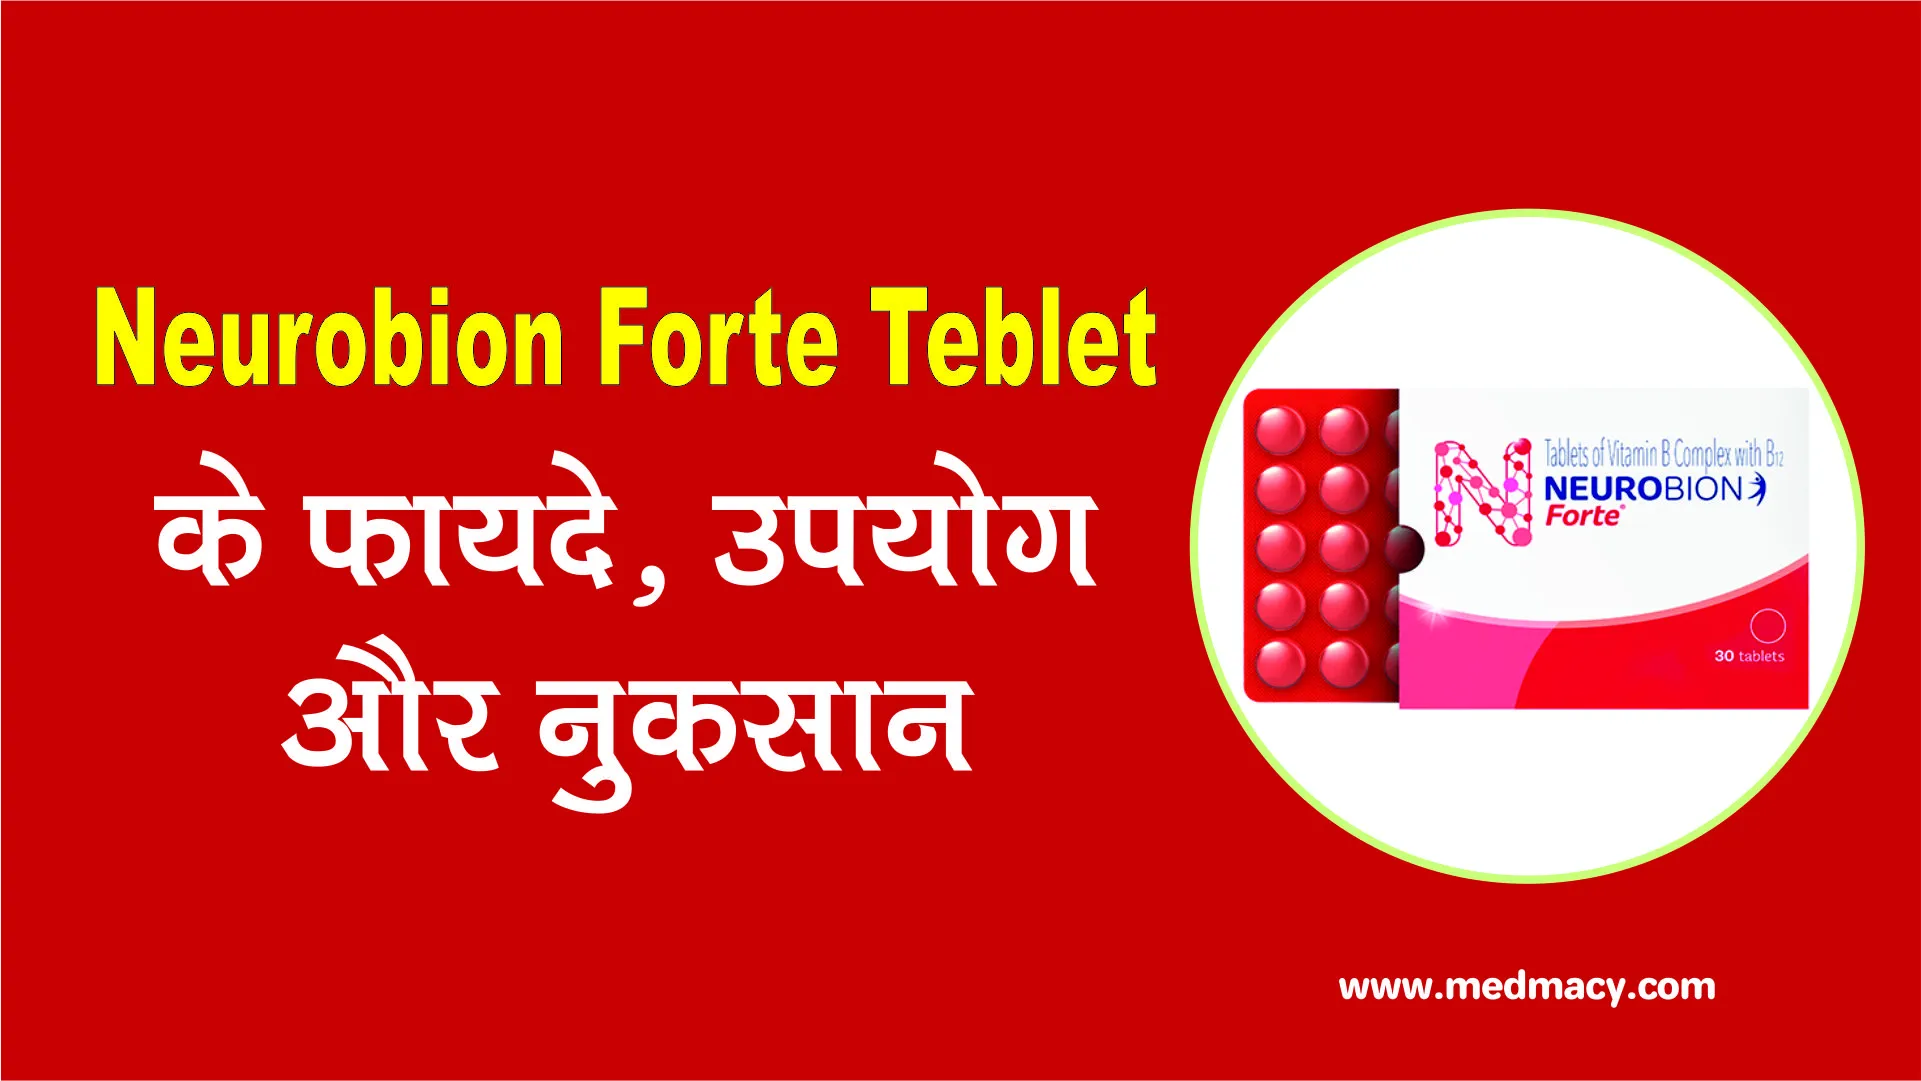 Neurobion Forte Tablet in Hindi